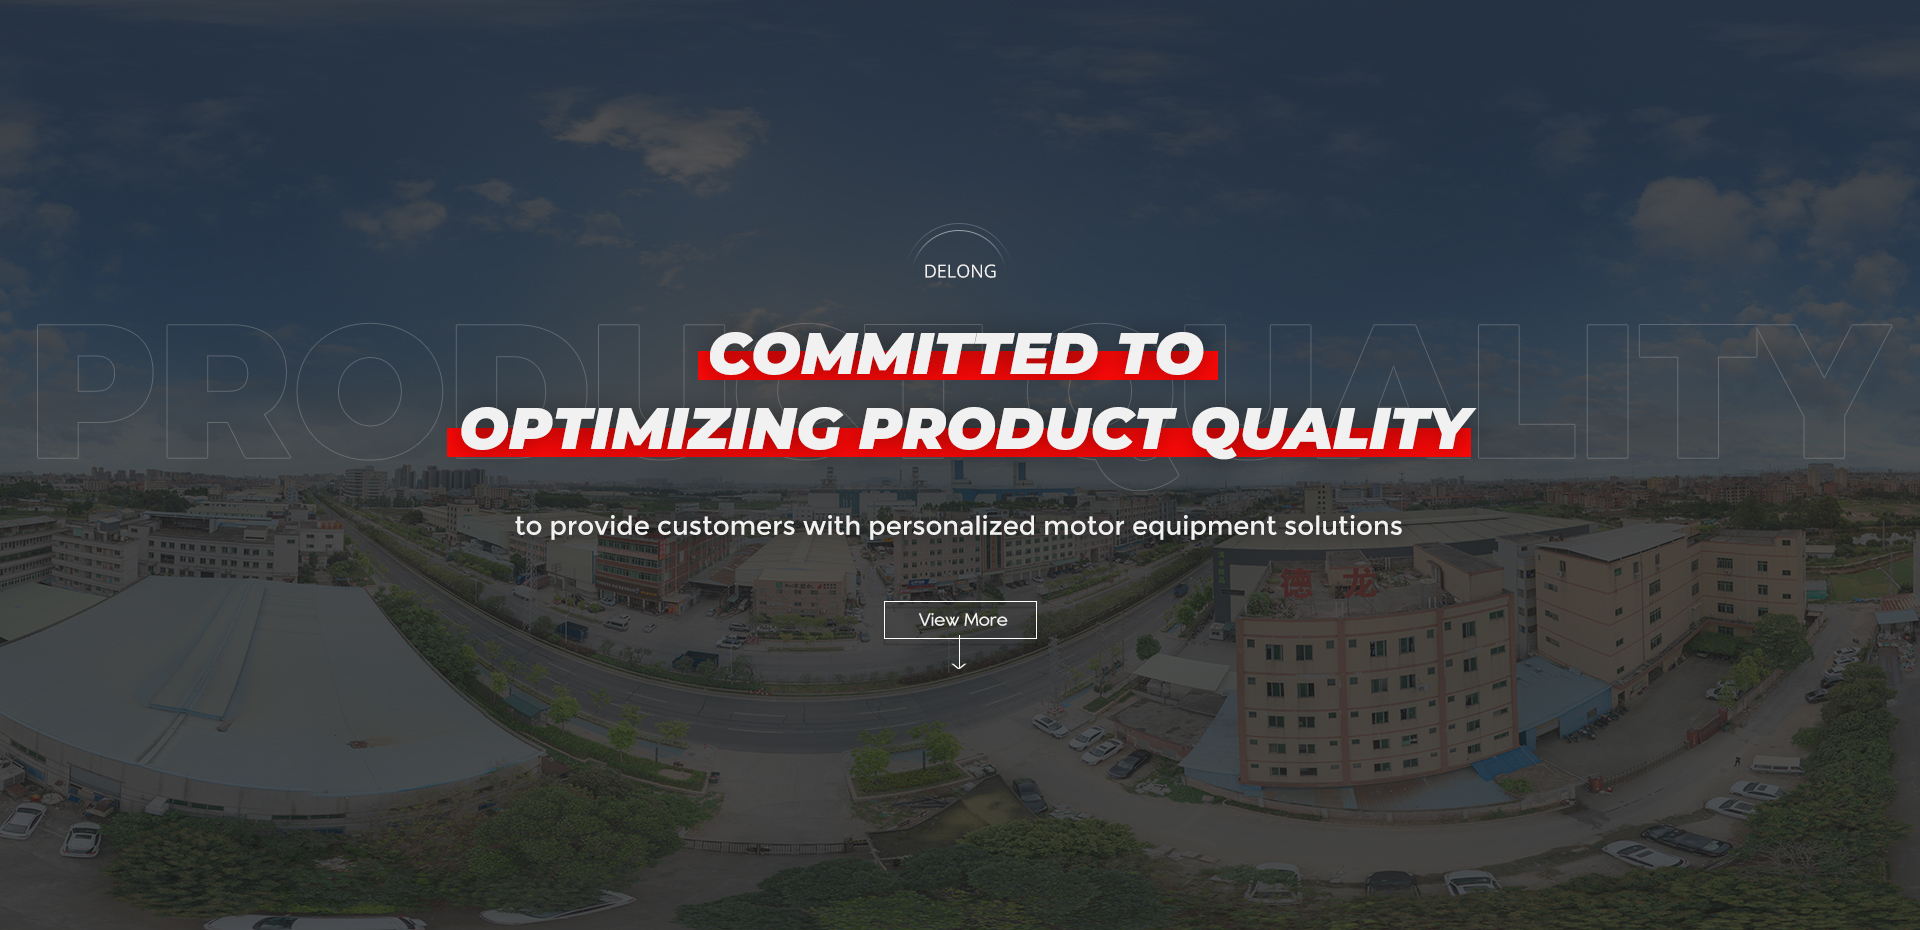 COMMITTED TO OPTIMIZING PRODUCT QUALITY